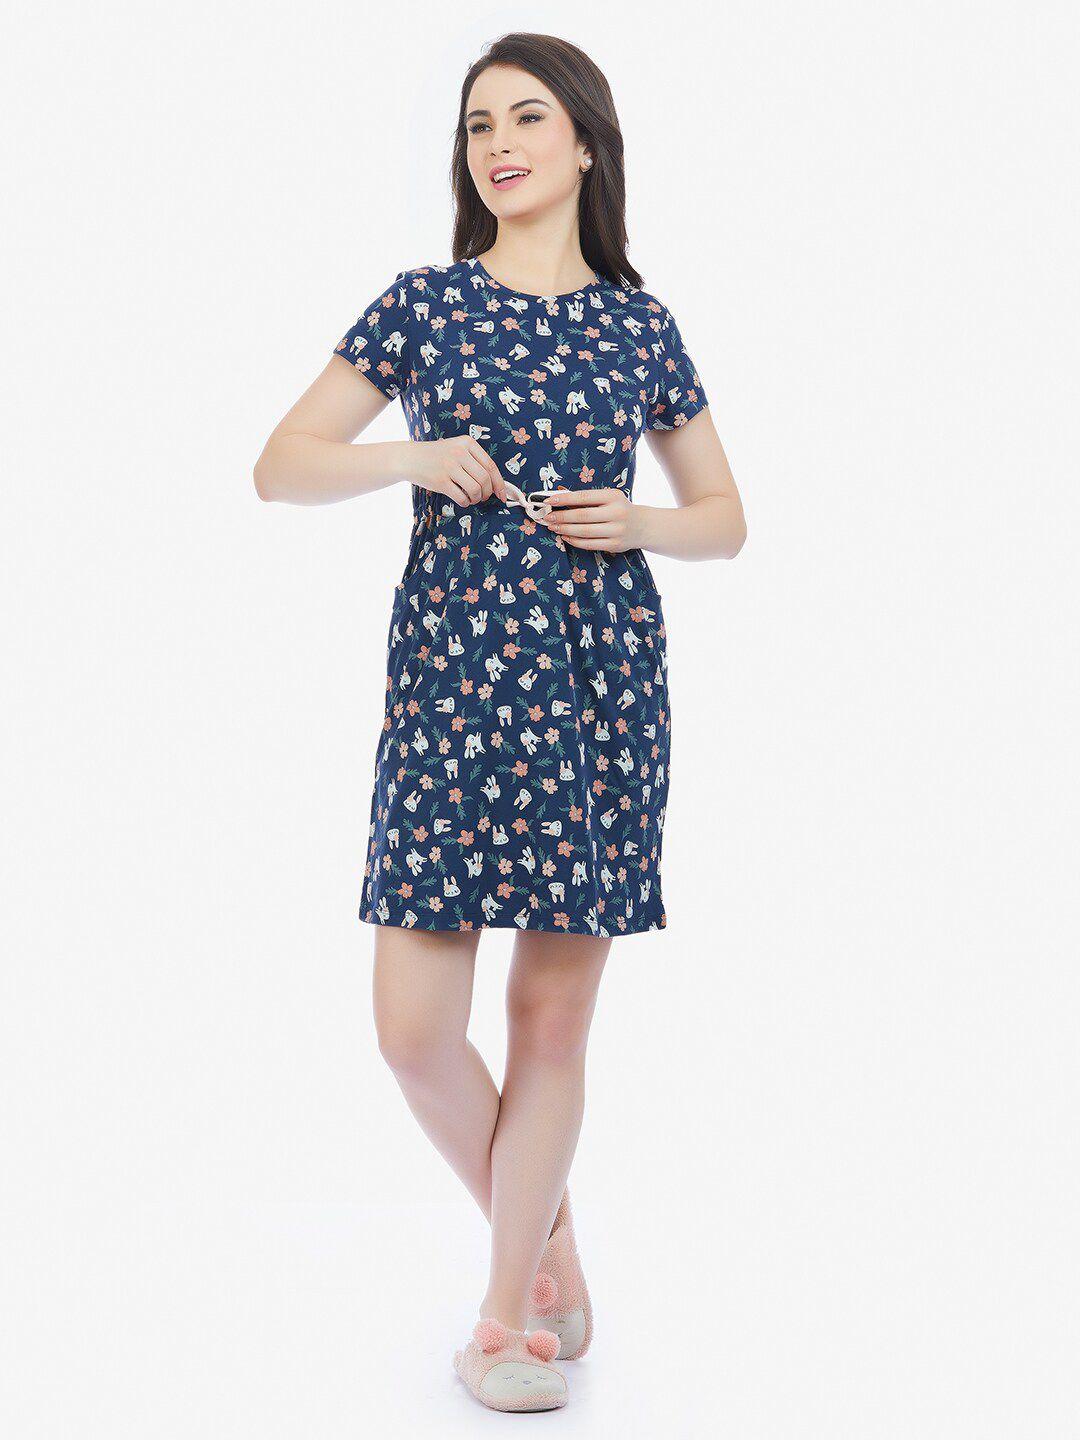 maysixty floral printed pure cotton t-shirt nightdress